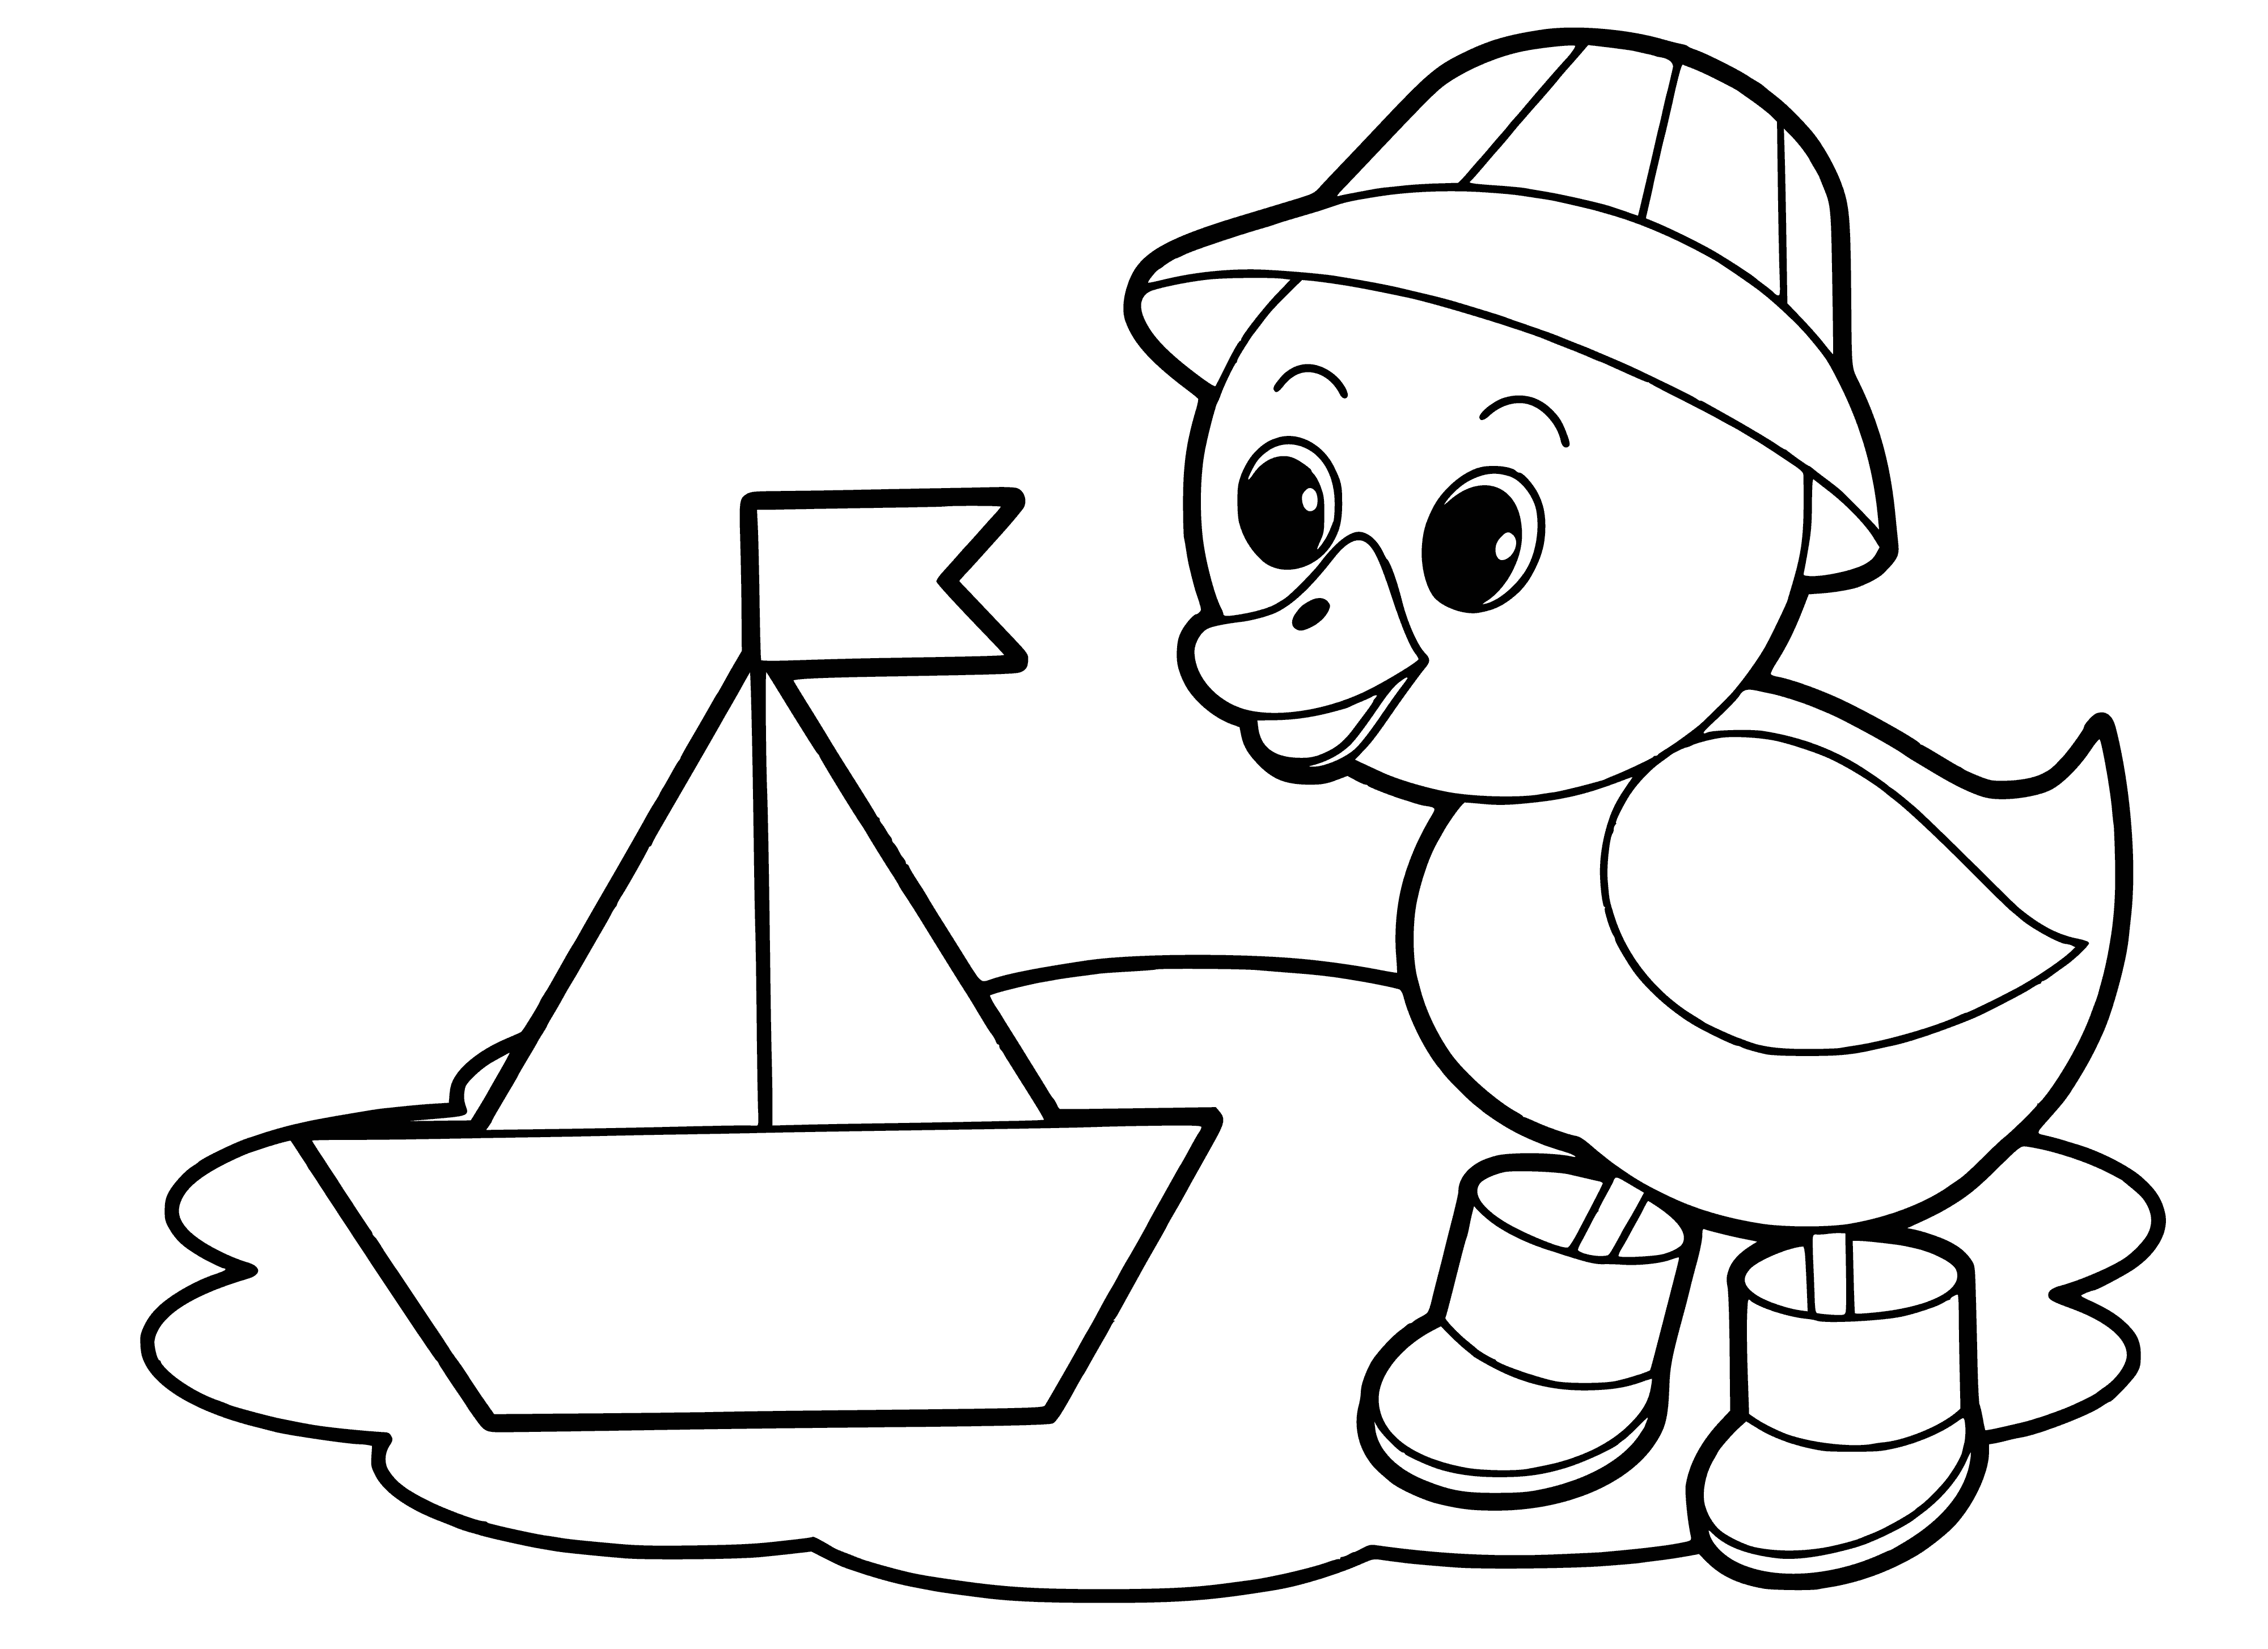 coloring page: Sum: A yellow chick & two eggs - one blue, one green - sit near a green plant in a coloring page.